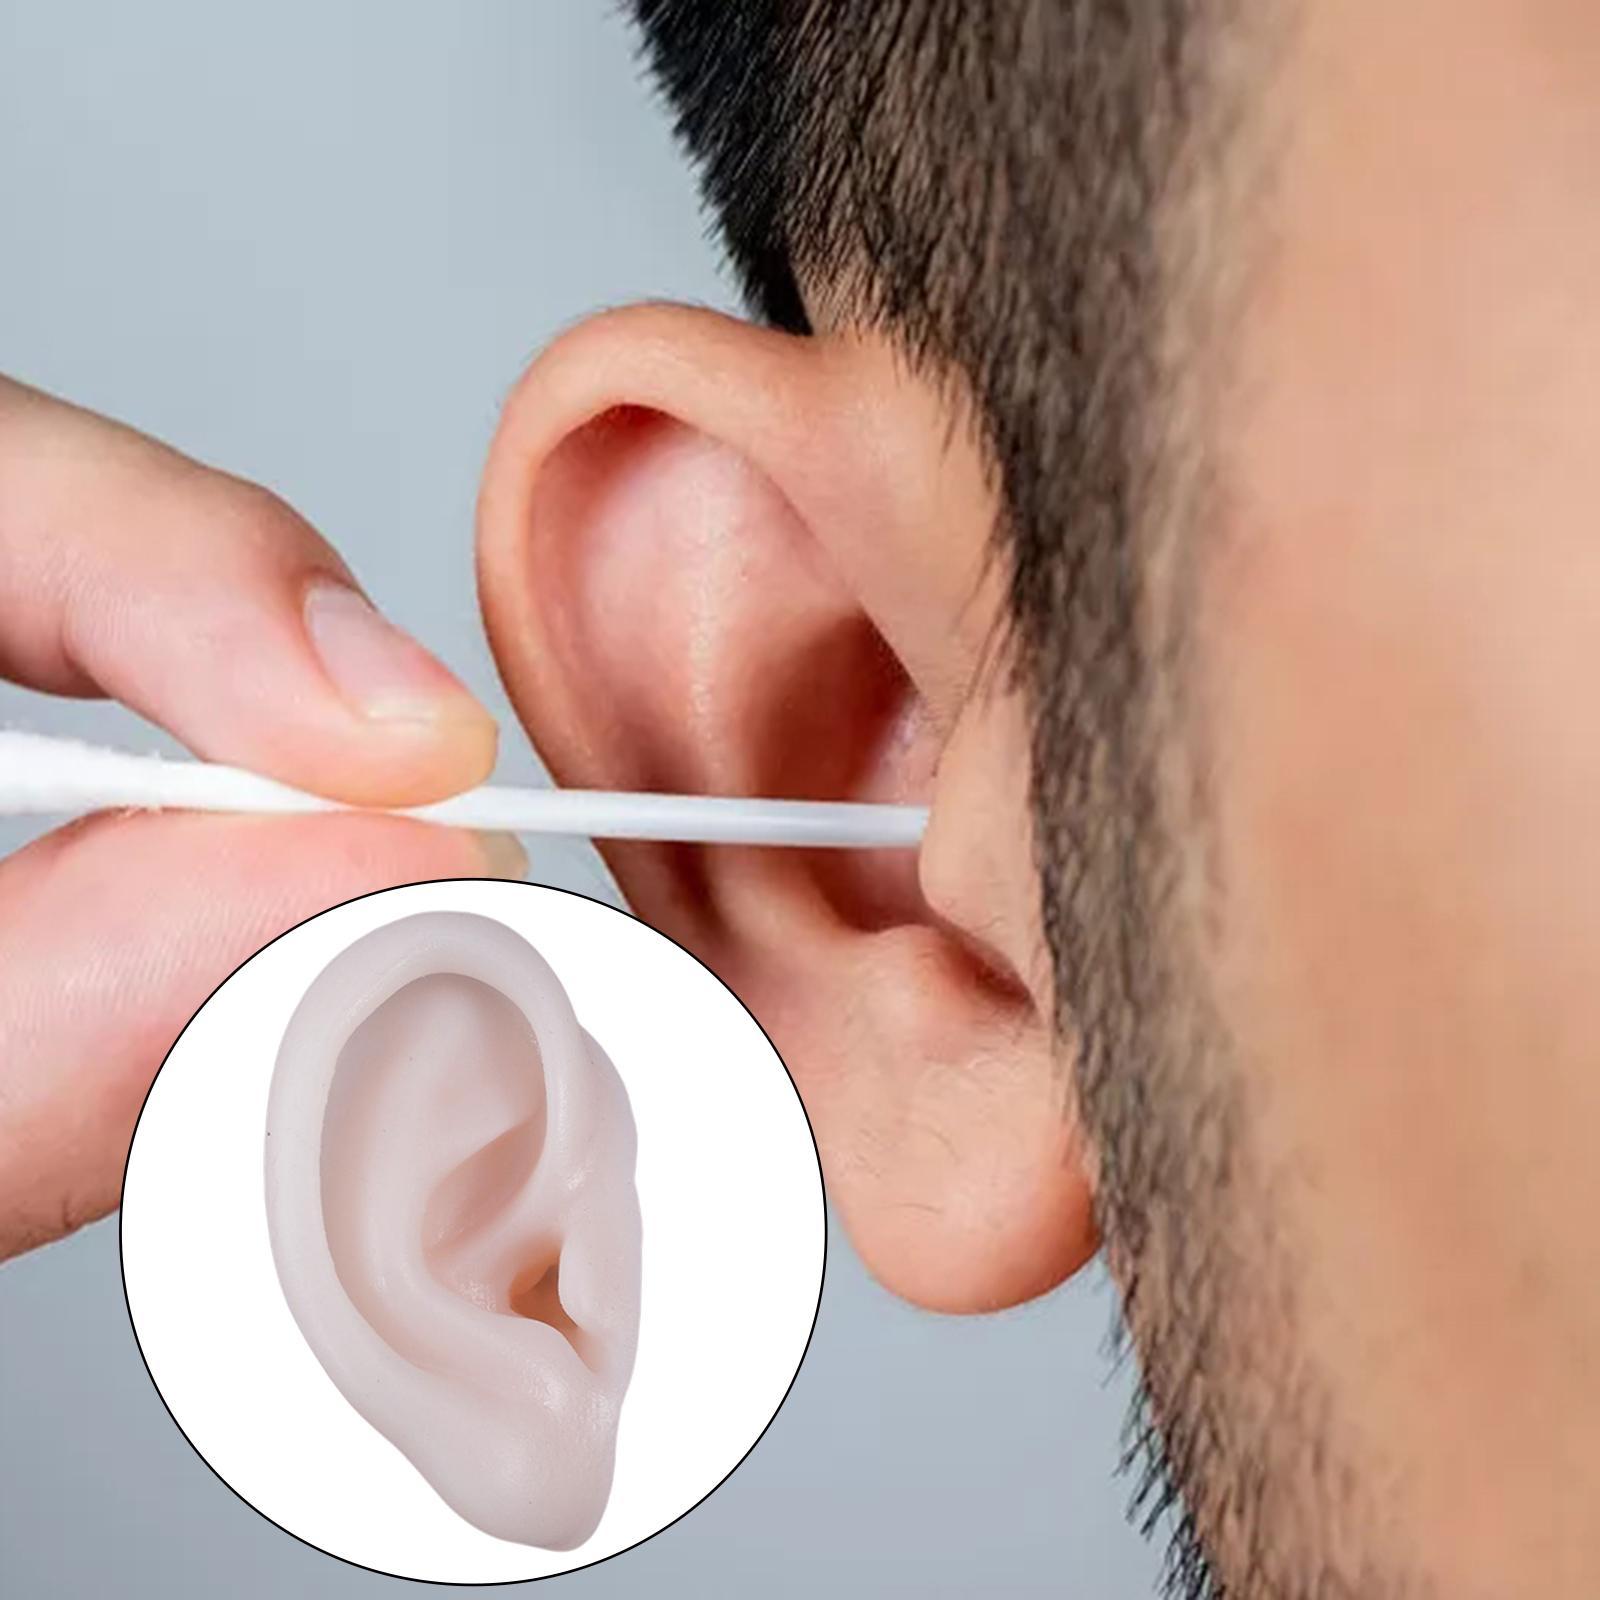 Ear Model, Soft Silicone, Props Teaching Tools Acupuncture Practice Model for Educational